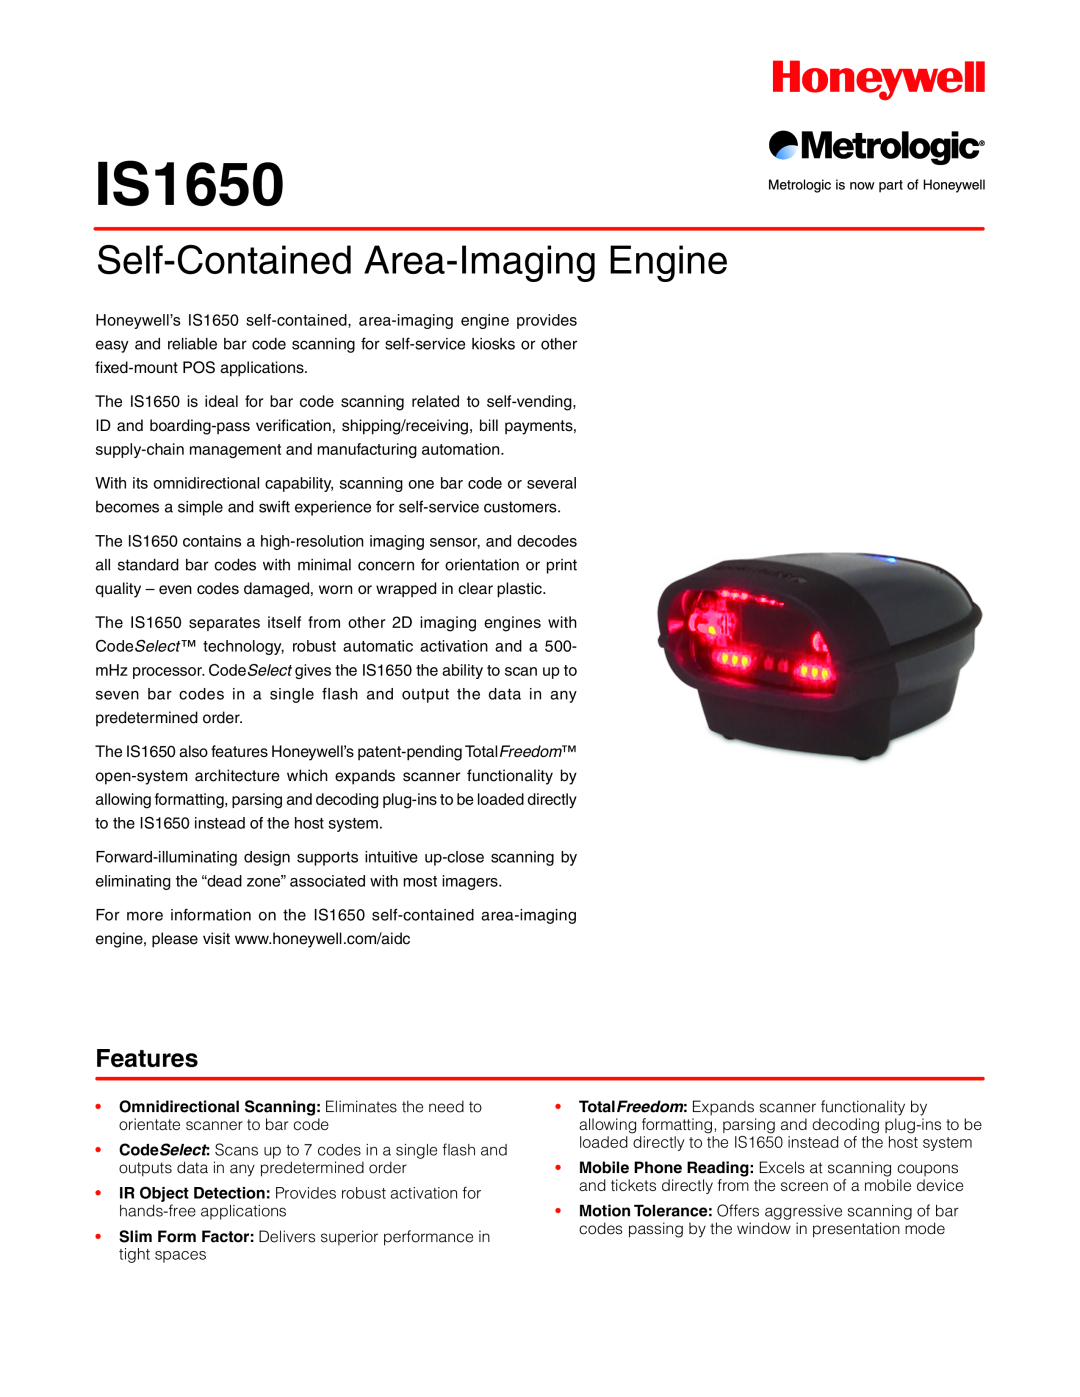 Metrologic Instruments IS1650 manual Self-Contained Area-Imaging Engine, Features 